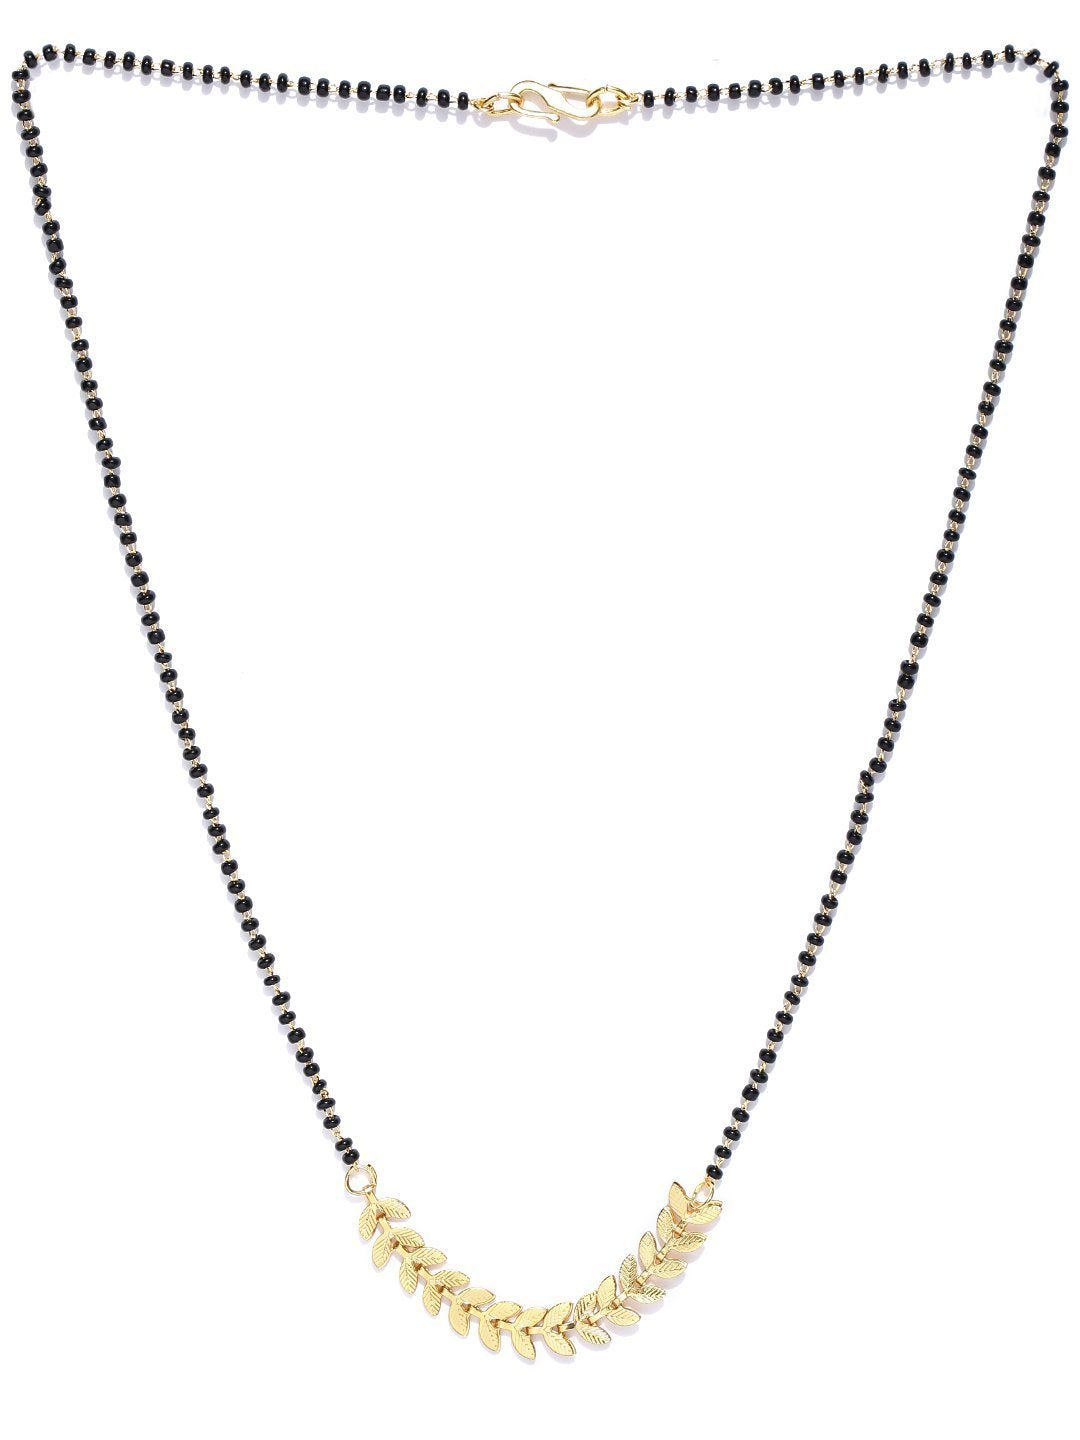 Women's Gold-Plated Leaf Designed Black Beads Chain Mangalsutra - Priyaasi